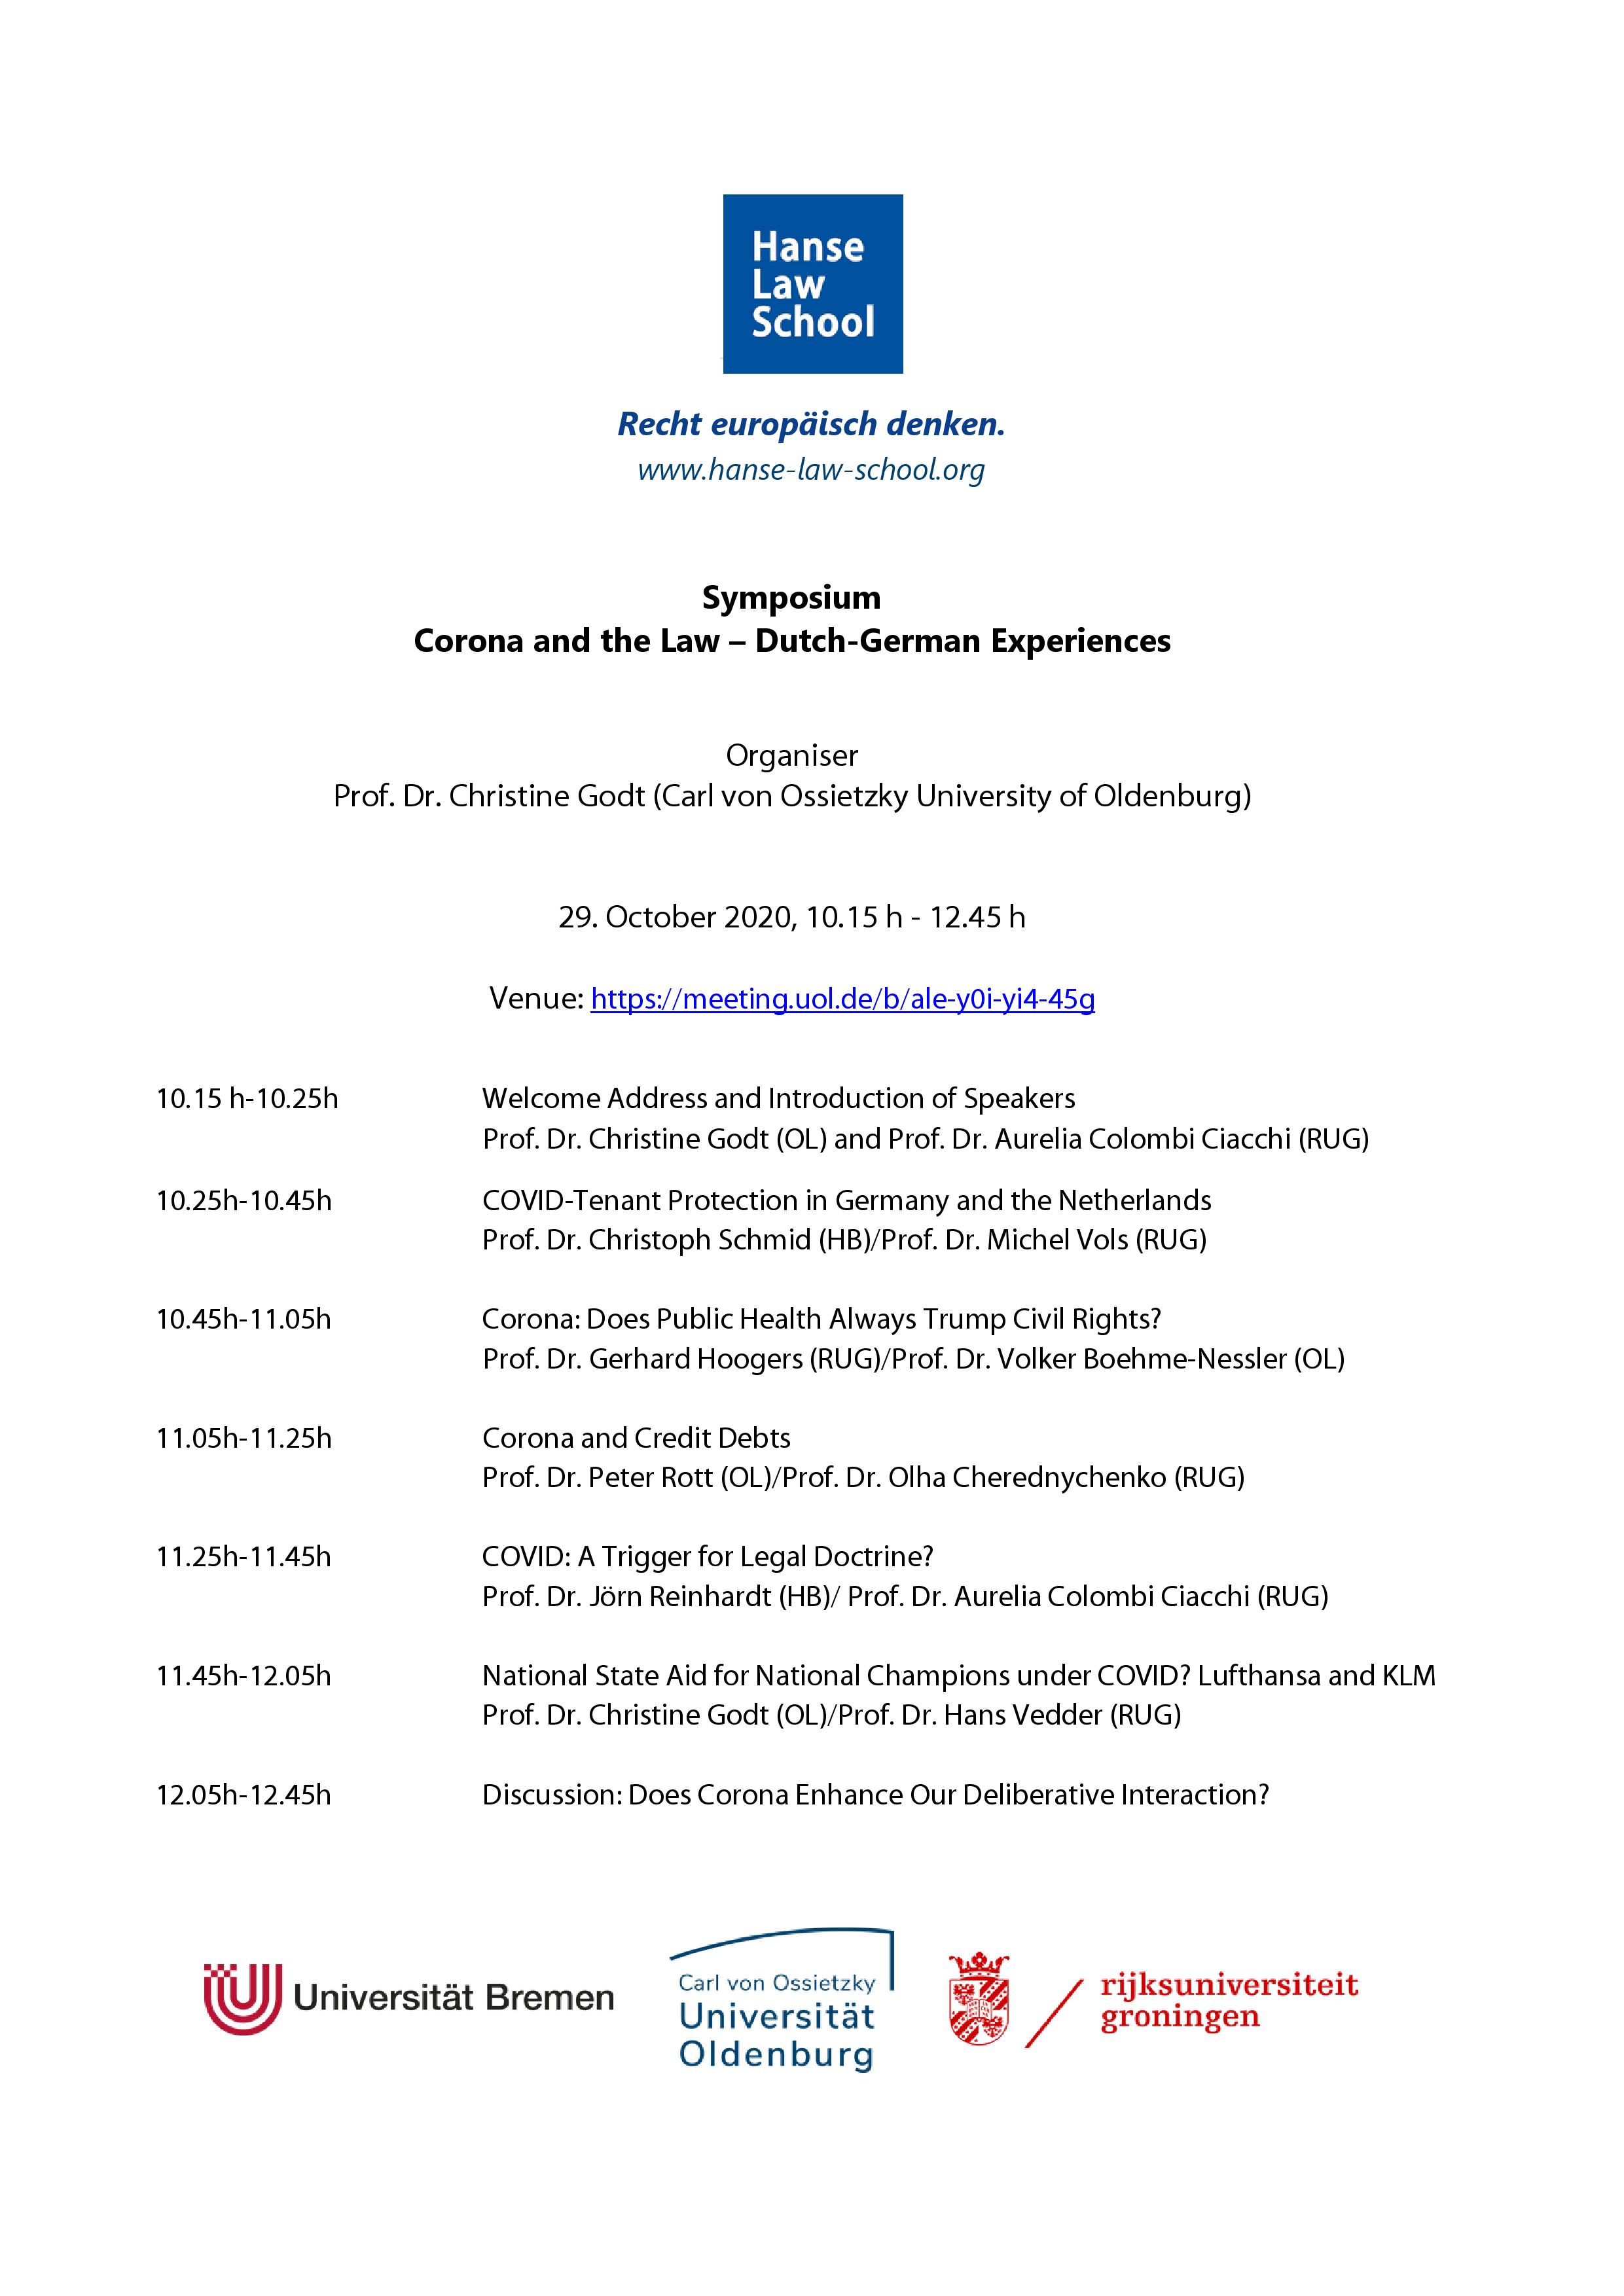 Programme symposium Corona and the Law 29 October 2020